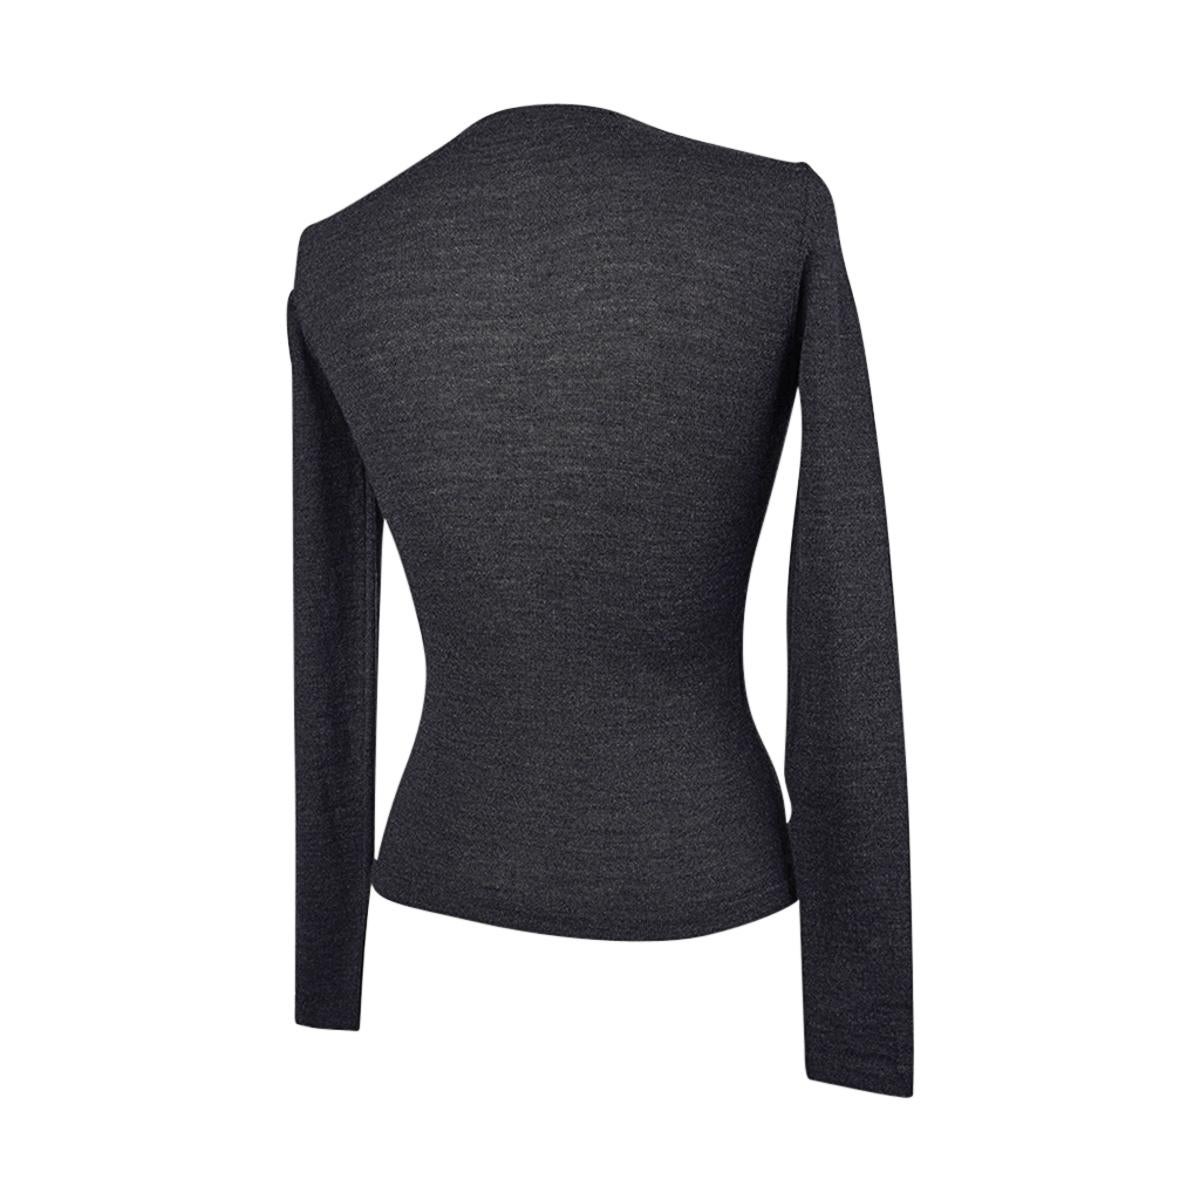 Mugler Vintage Charcoal Gray Knit Top Classic S 2